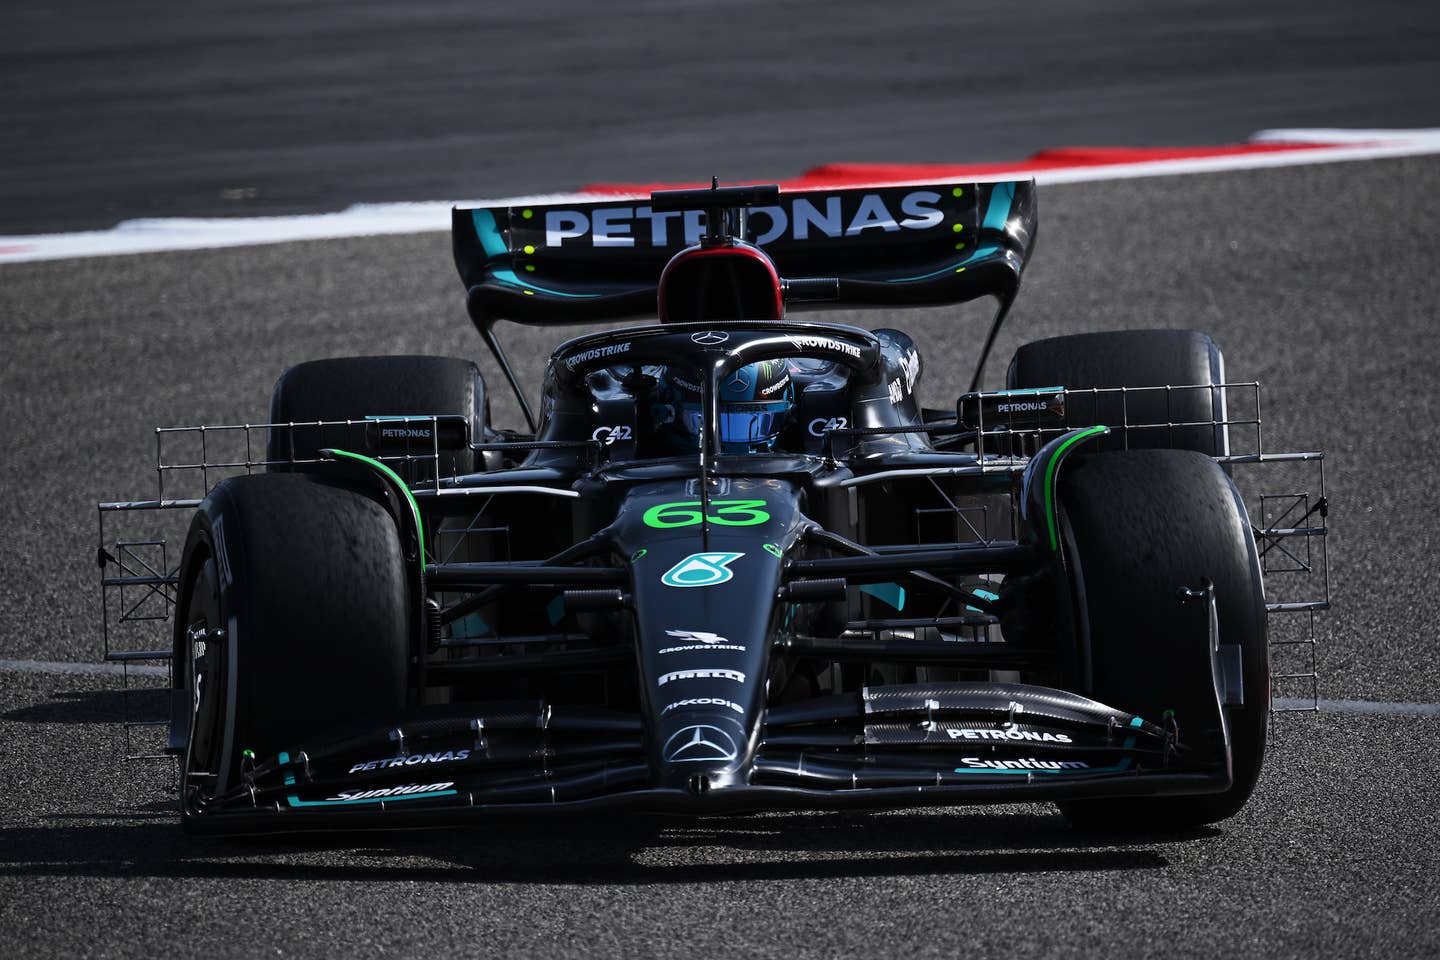 BAHRAIN, BAHRAIN - FEBRUARY 23: George Russell of Great Britain driving the (63) Mercedes AMG Petronas F1 Team W14 on track during day one of F1 Testing at Bahrain International Circuit on February 23, 2023 in Bahrain, Bahrain. (Photo by Clive Mason/Getty Images)